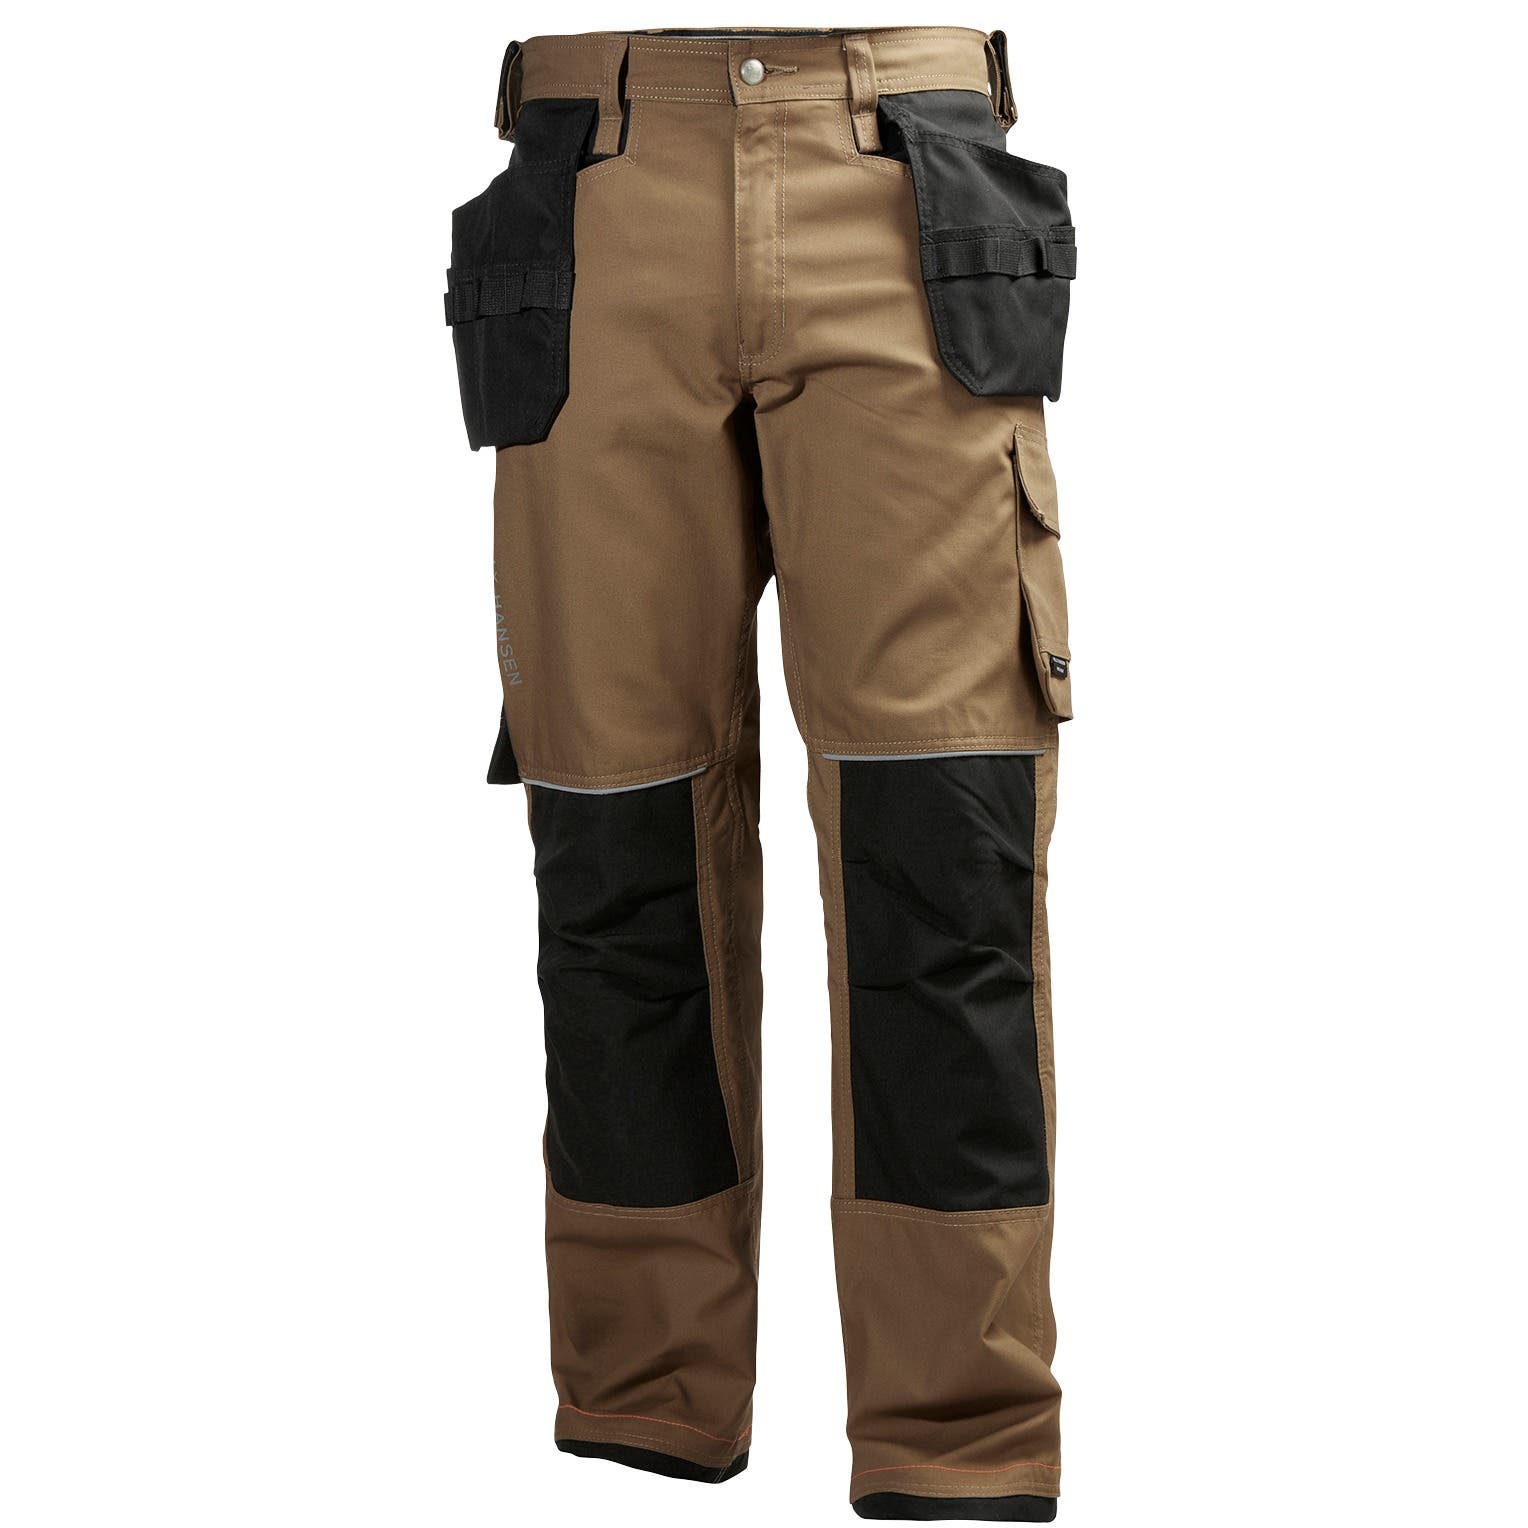 Helly Hansen Men's Chelsea Construction Na Pant in Timber from the front